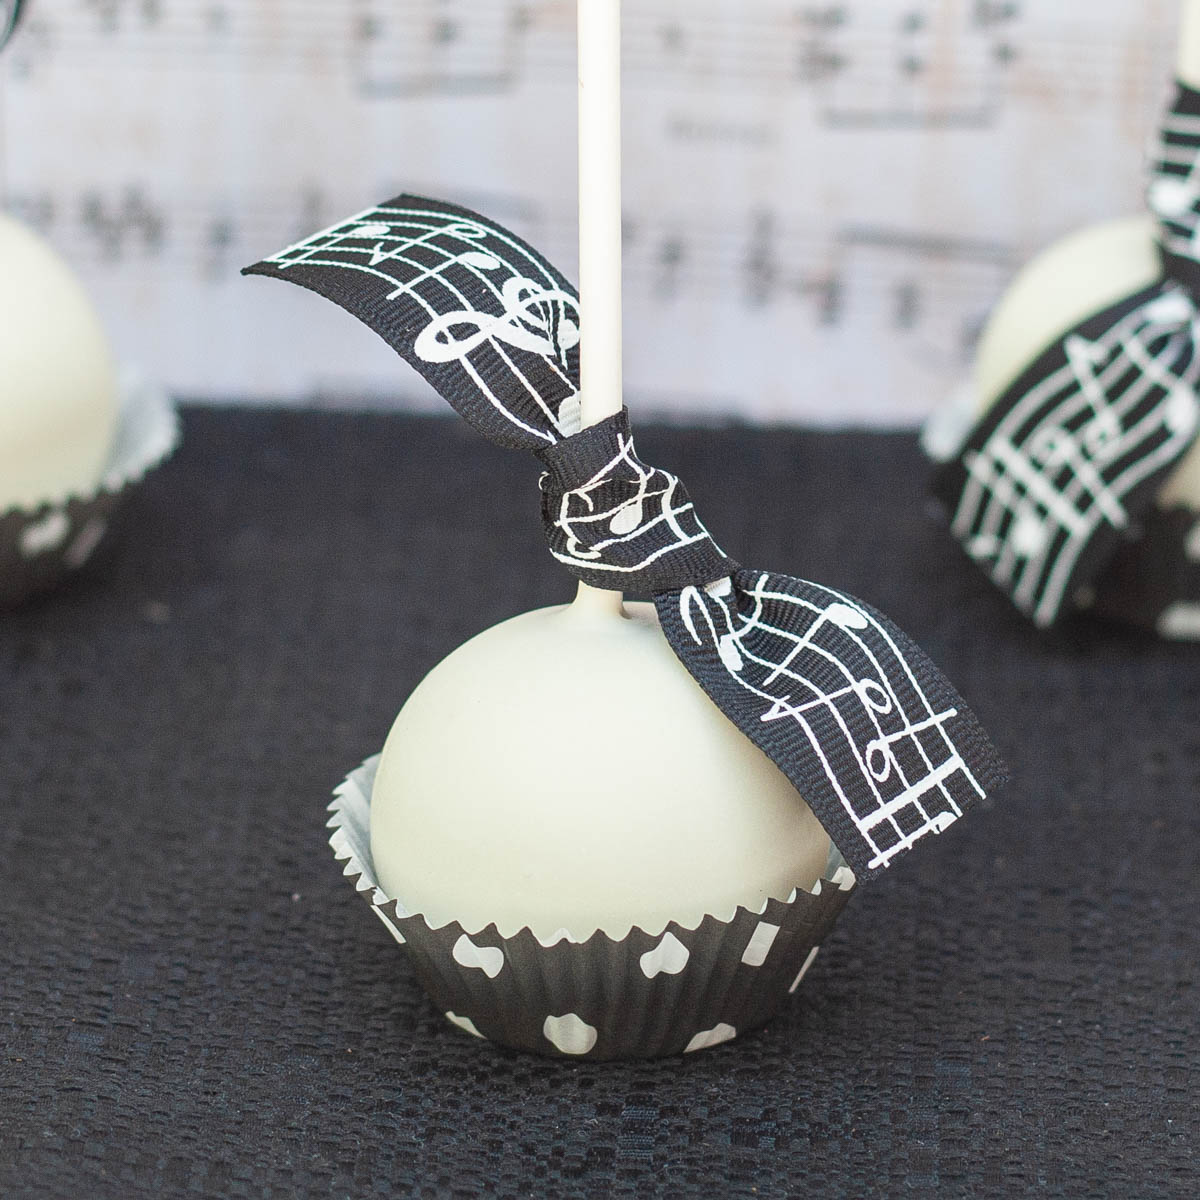 White chocolate coated cake pop in black paper baking cup, tied with music themed ribbon.